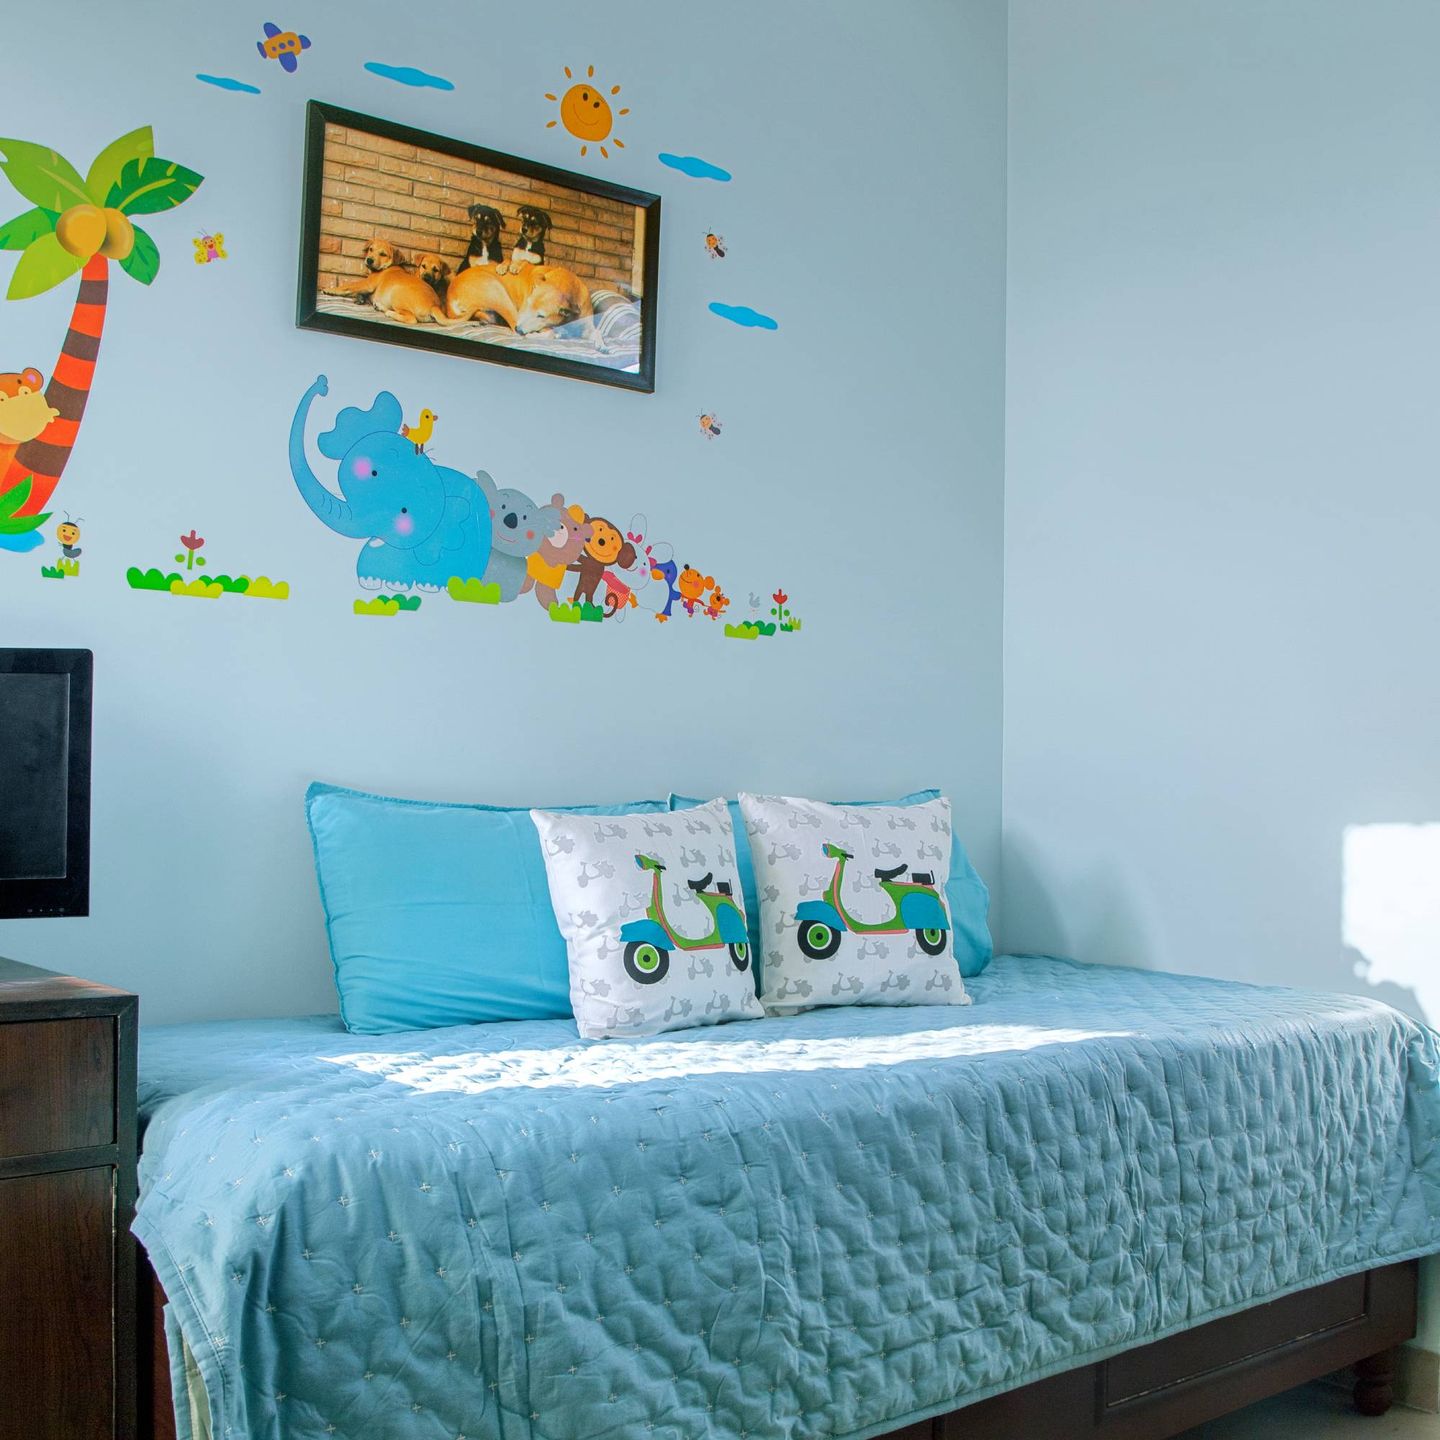 Kid's Room With Wooden Furniture - Livspace